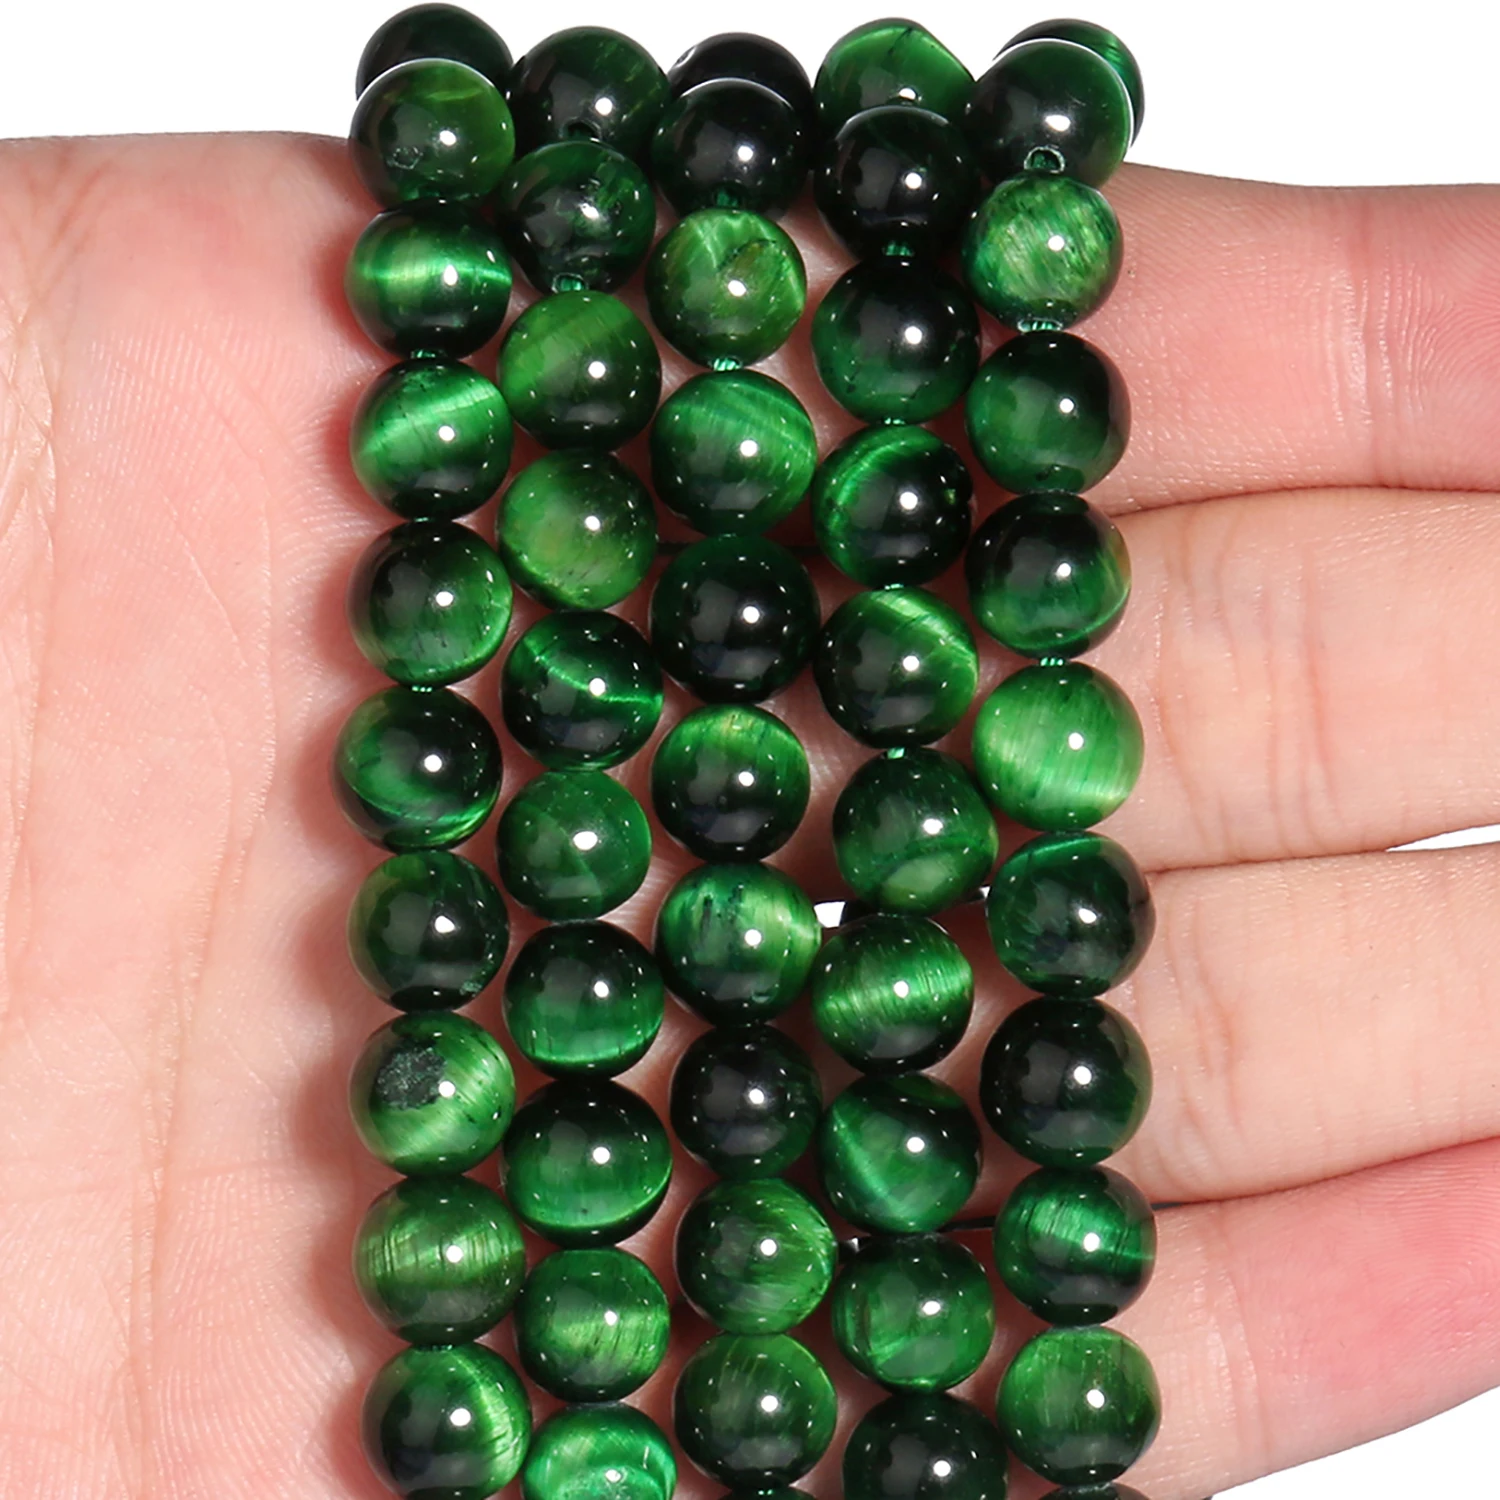 

Green Tiger Eye Natural Stone Beads 4mm-12mm Round Loose Spacer Beads for Jewelry Making Bracelet DIY Necklace Accessories 15"